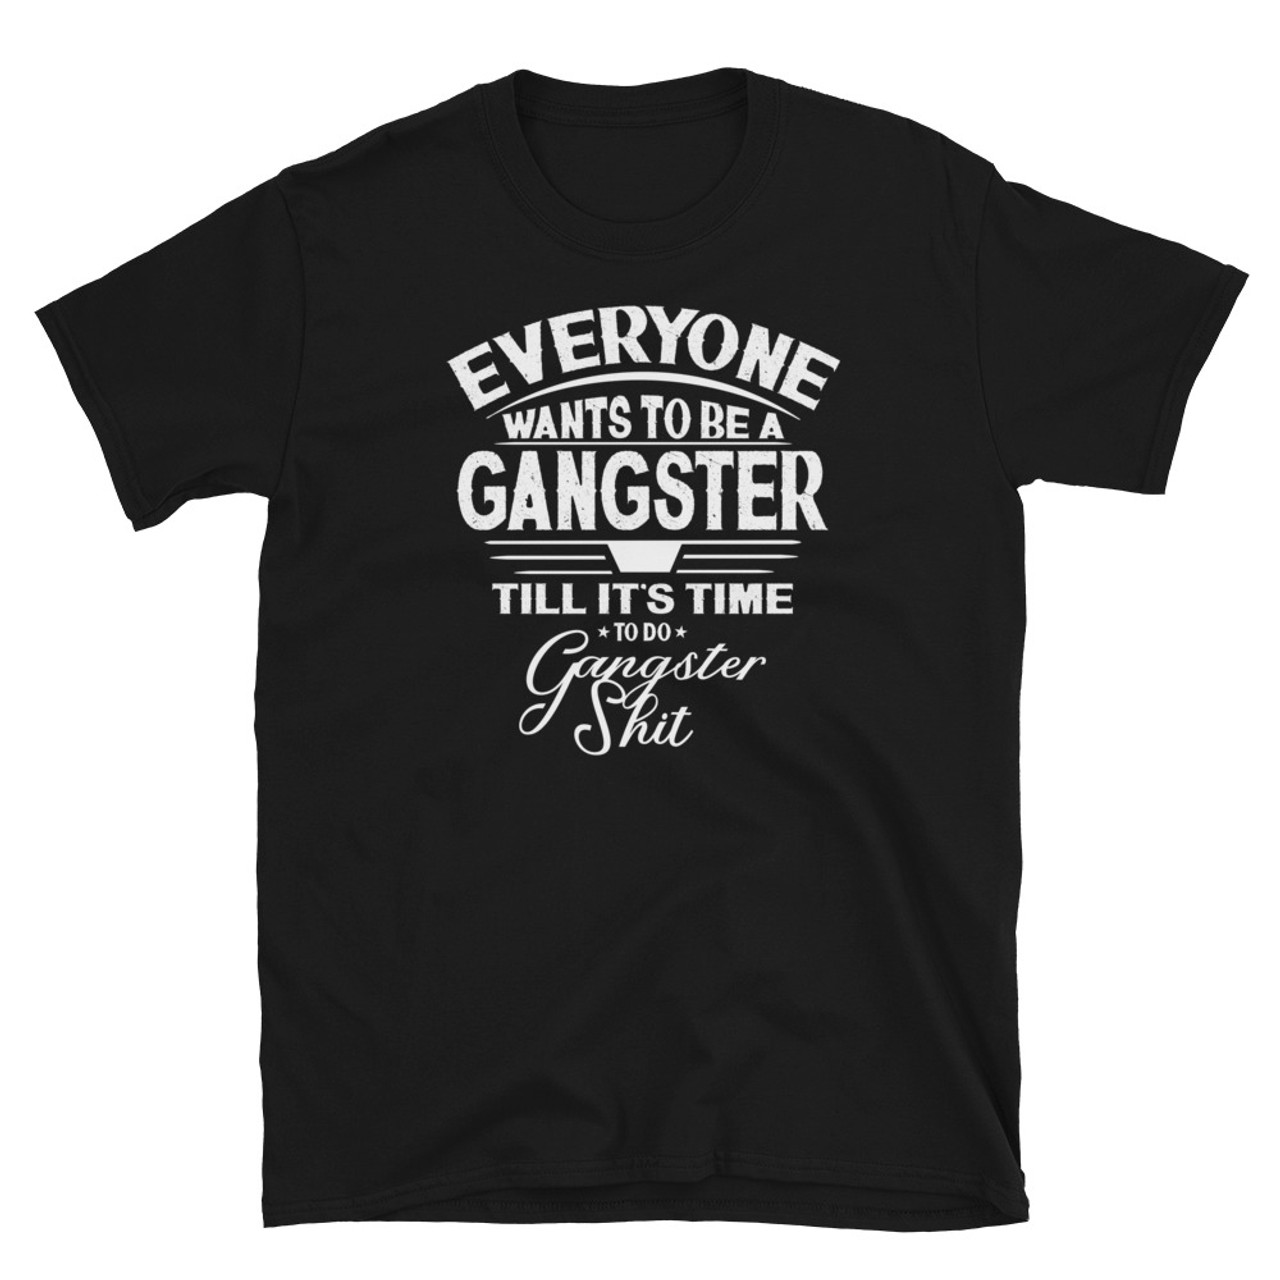 Synes gaffel maskine Everyone Wants to be a Gangster (White Text) Short-Sleeve Unisex T-Shirt -  Meach's Military Memorabilia & More